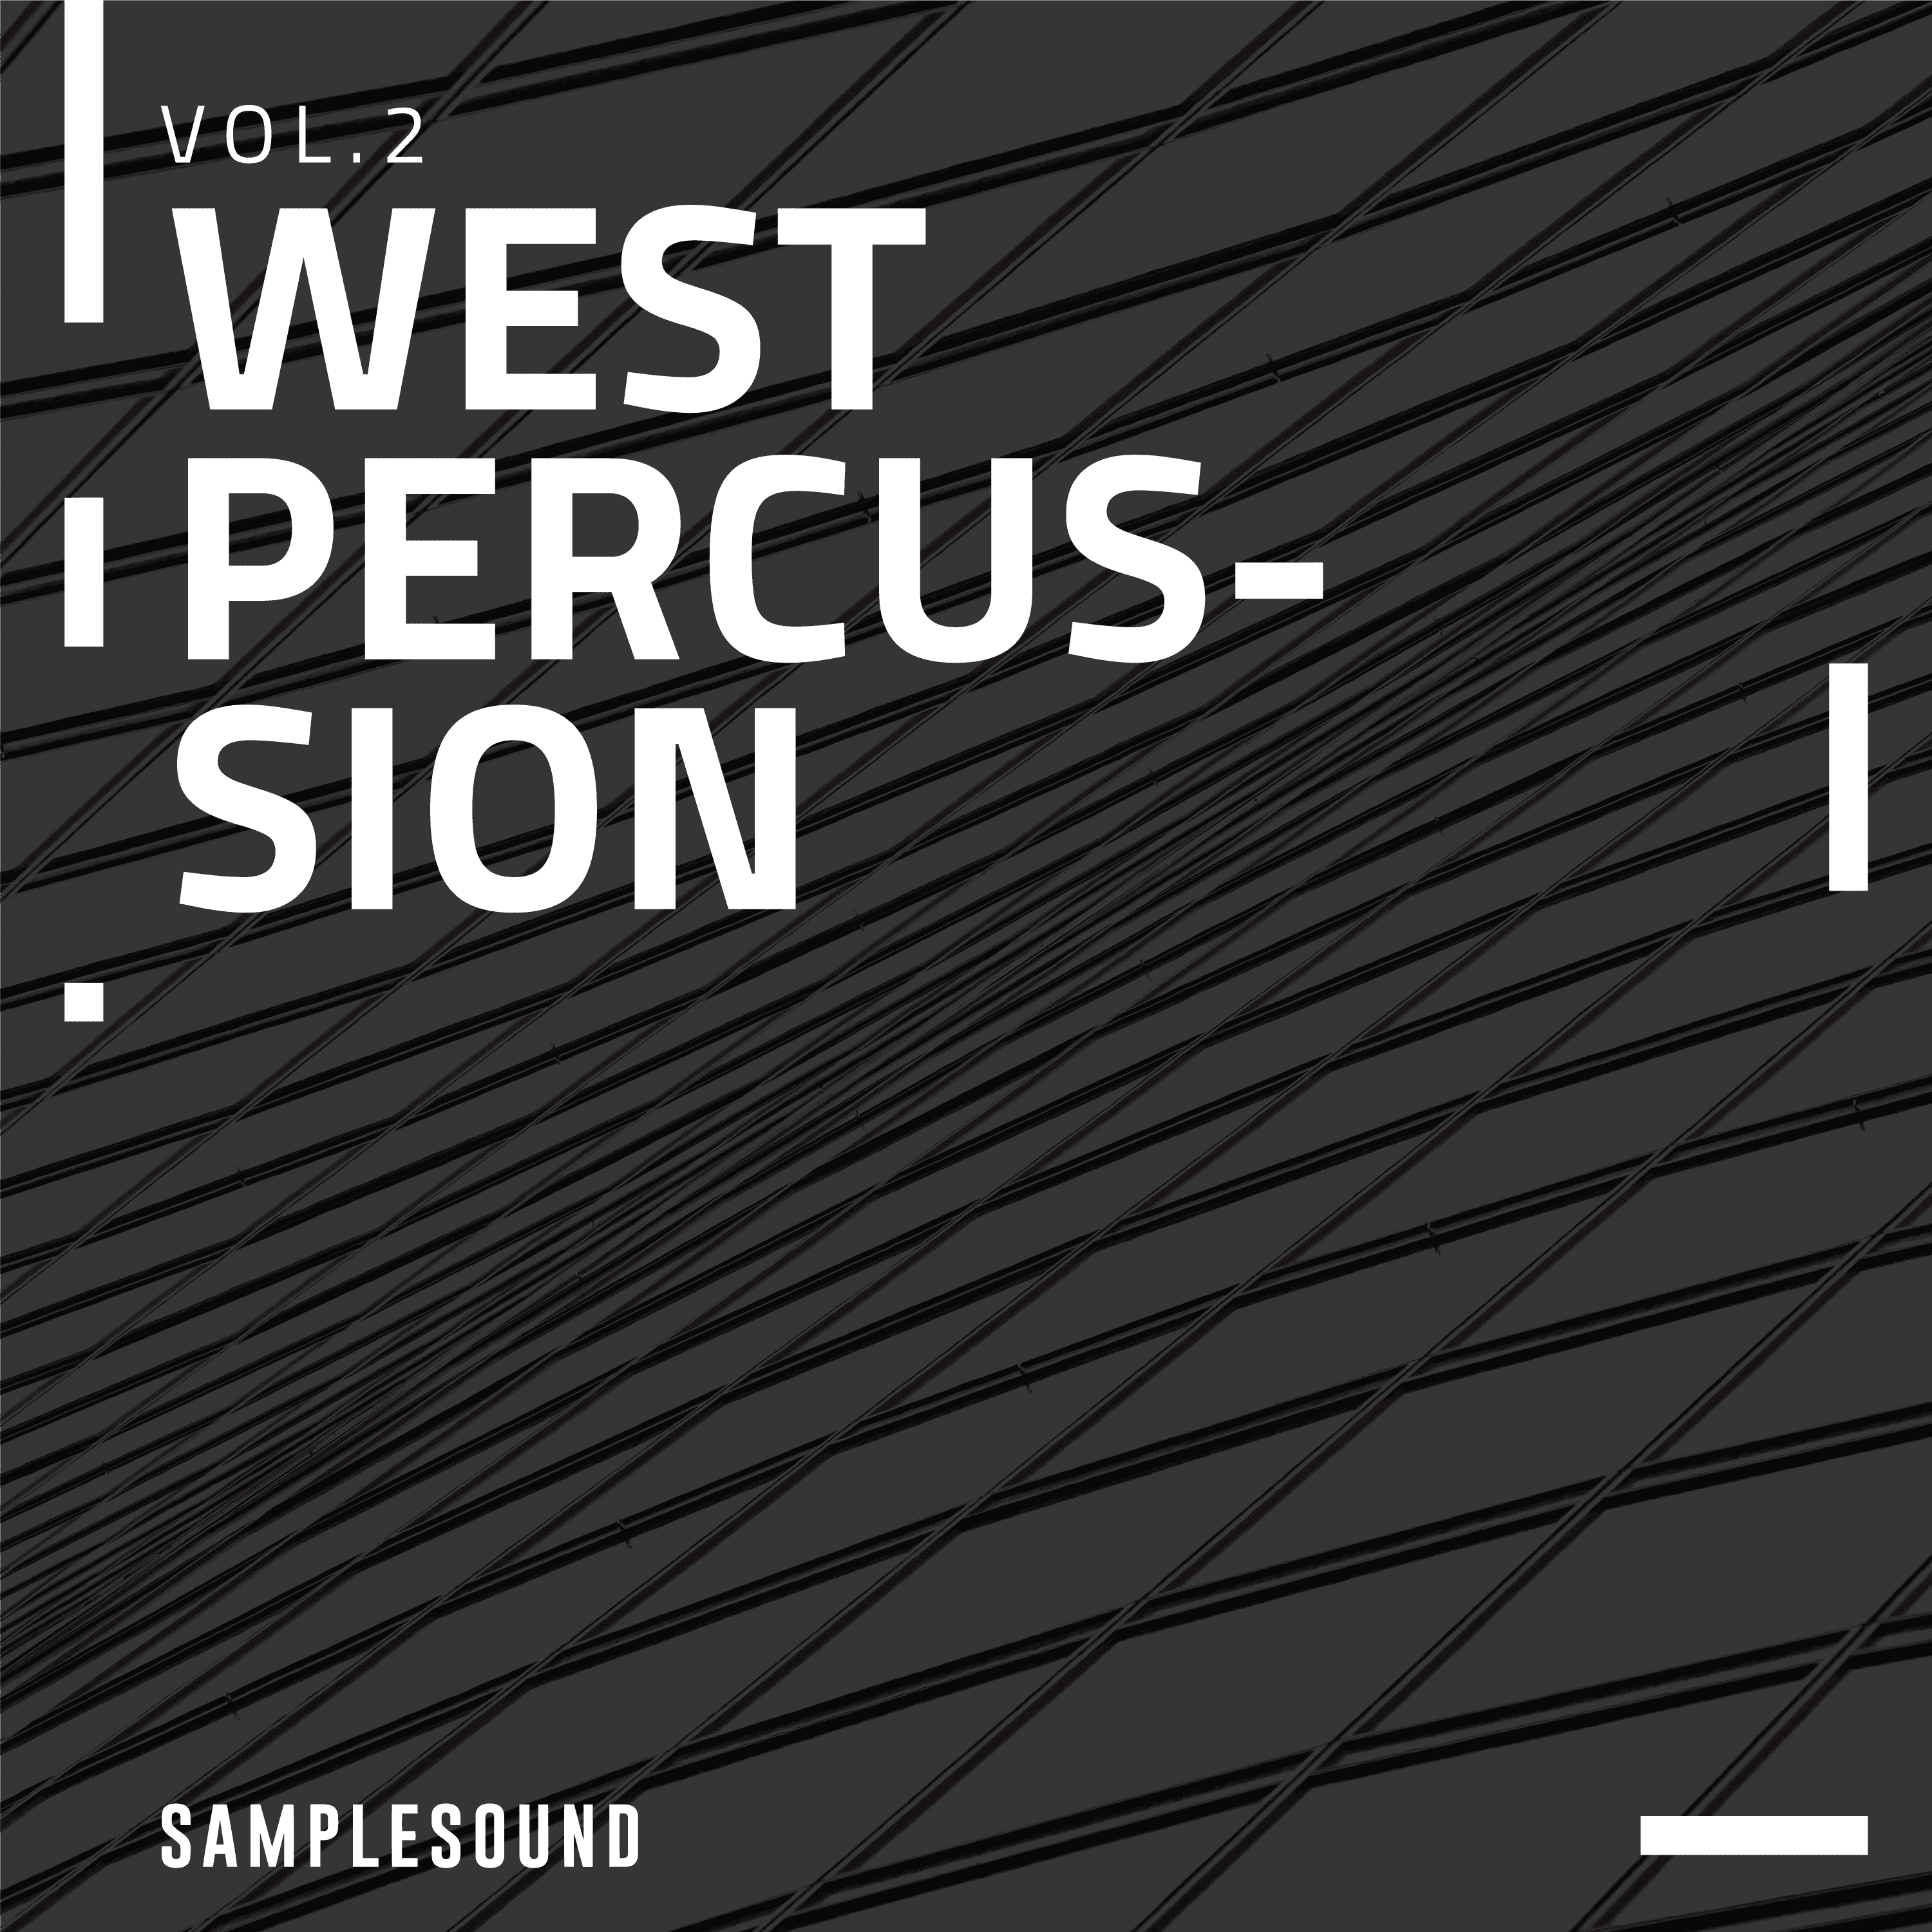 West Percussion: Volume 2 by Samplesound